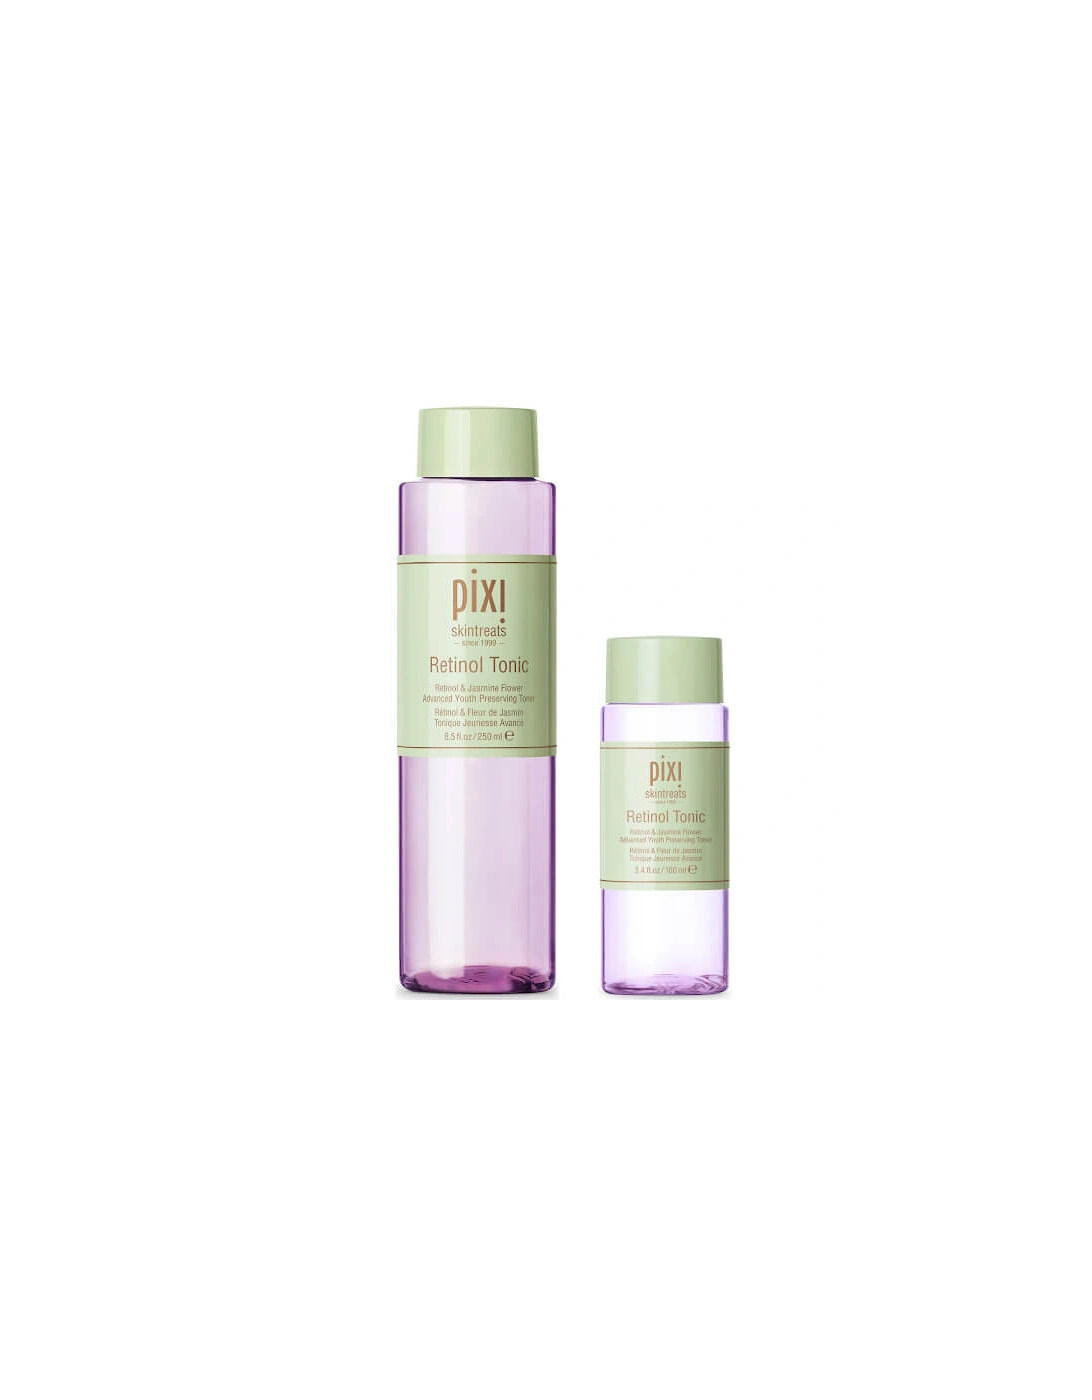 Retinol Tonic Home and Away Duo Exclusive, 2 of 1